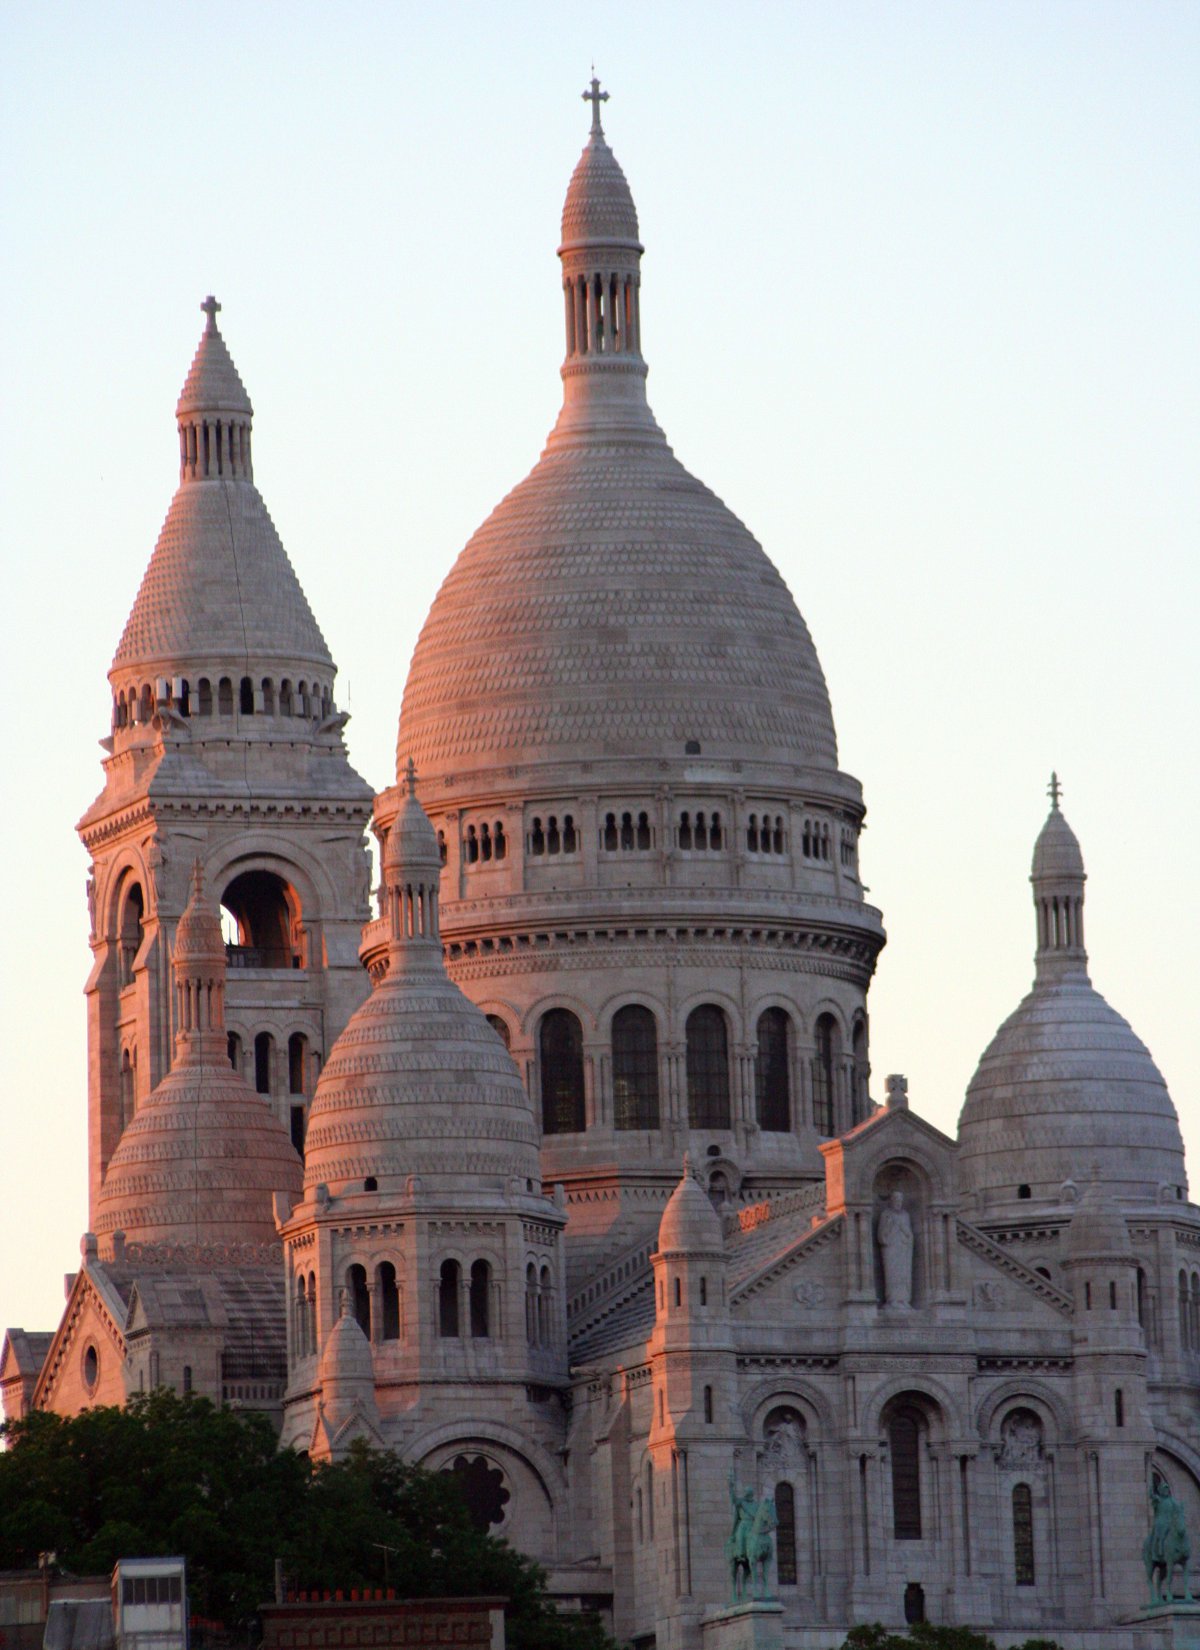 Pictures of the French Sacré-Coeur Cathedral with unique architectural style